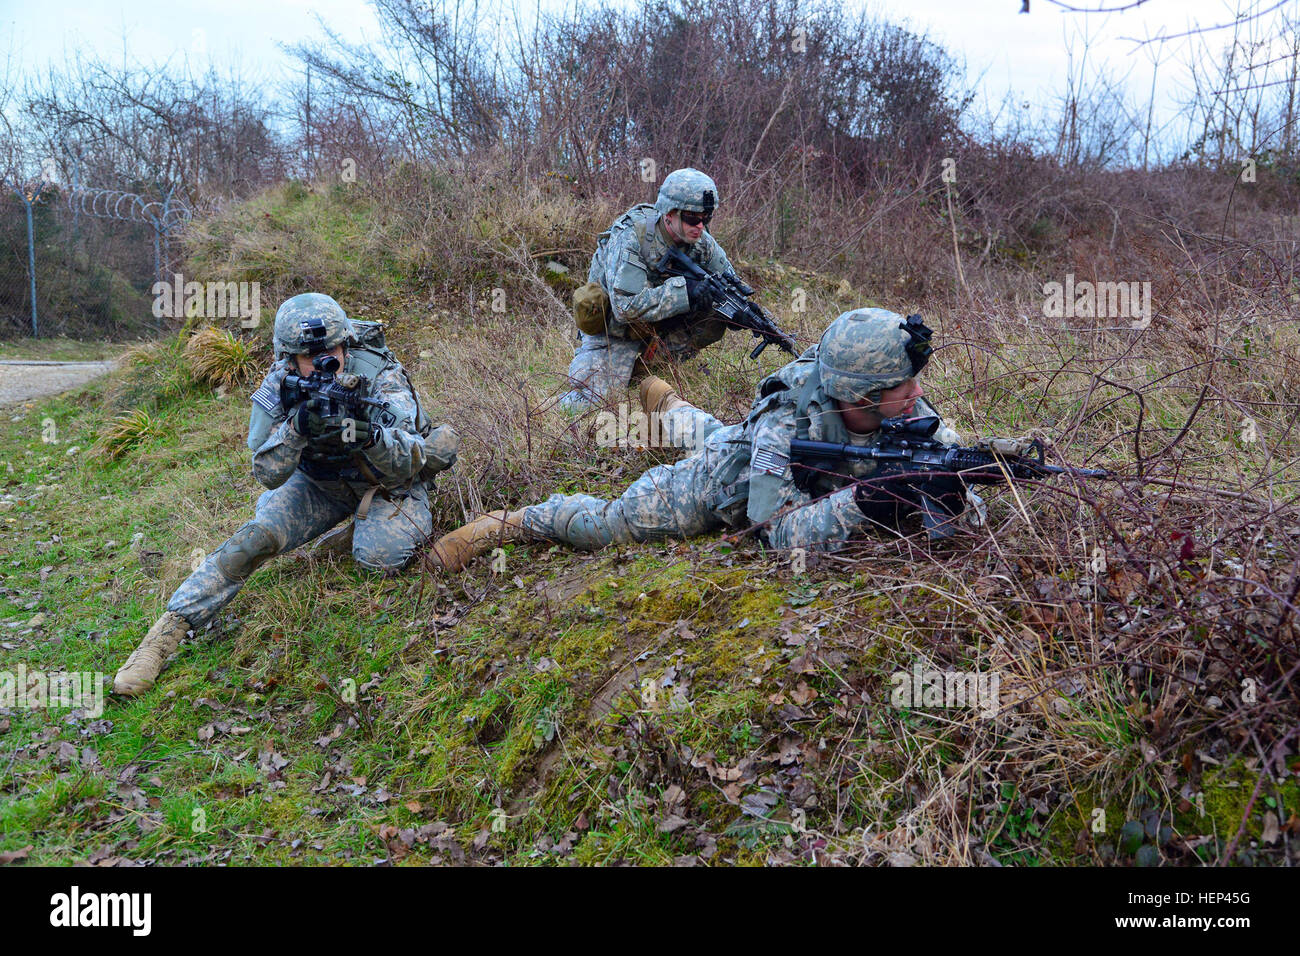 U.S. Army paratroopers from Company C, 1st Battalion, 503rd Infantry Regiment, 173rd Airborne Brigade, patrol a hilltop Feb. 4, 2015, during training at Longare Complex, Vicenza, Italy. The 173rd Airborne is the Army’s Contingency Response Force in Europe, capable of rapidly projecting forces in Europe, Africa and the Middle East. (U.S. Army photo by Visual Information Specialist Davide Dalla Massara/Released) 173rd Airborne Brigade day and night patrolling at Longare Complex, Vicenza, Italy 150204-A-DO858-203 Stock Photo